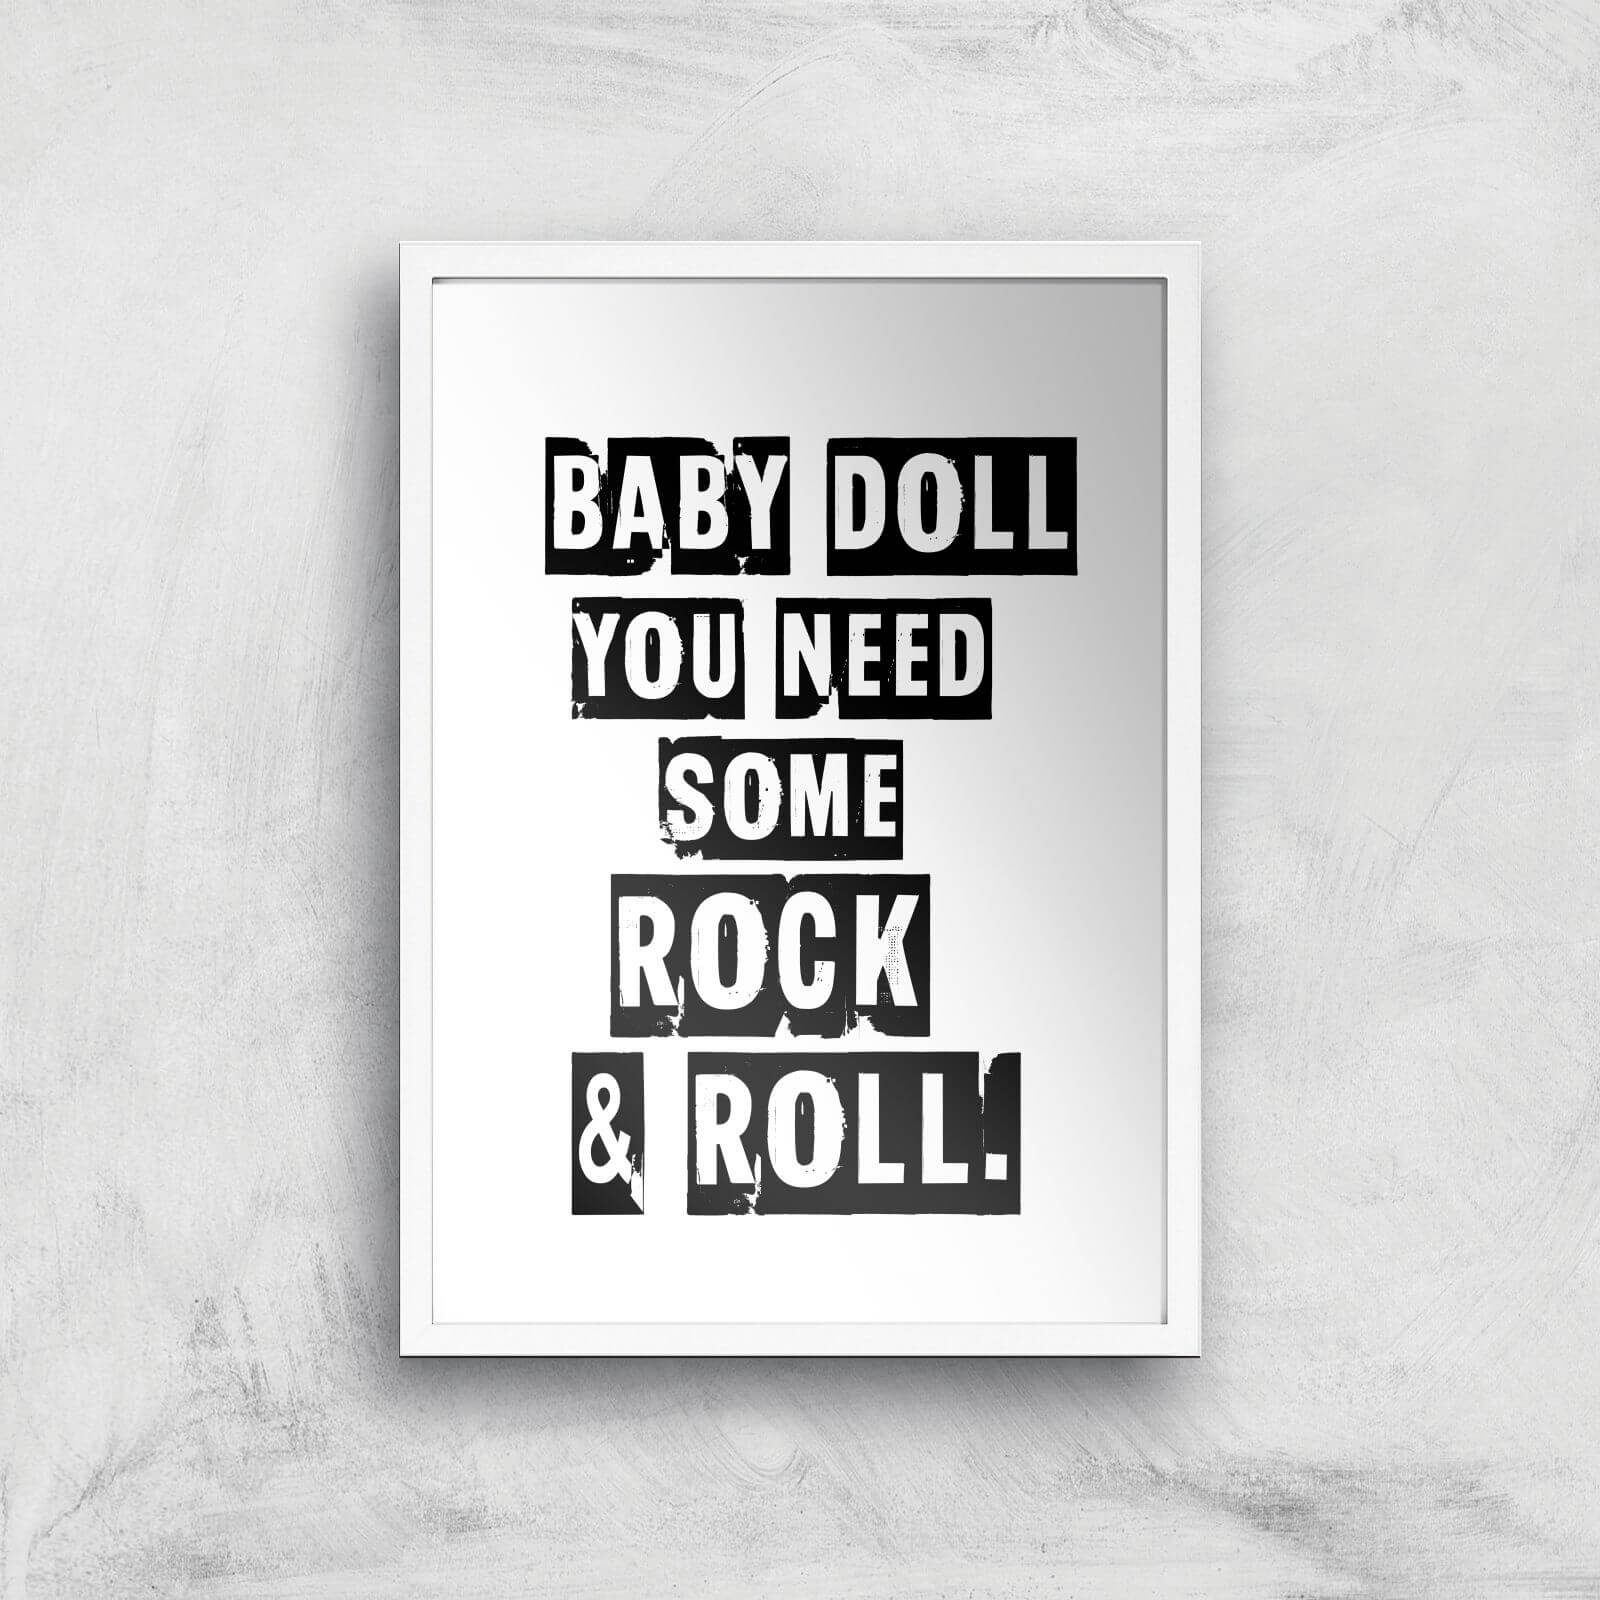 Baby Doll You Need Some Rock & Roll Giclee Art Print - A3 - White Frame